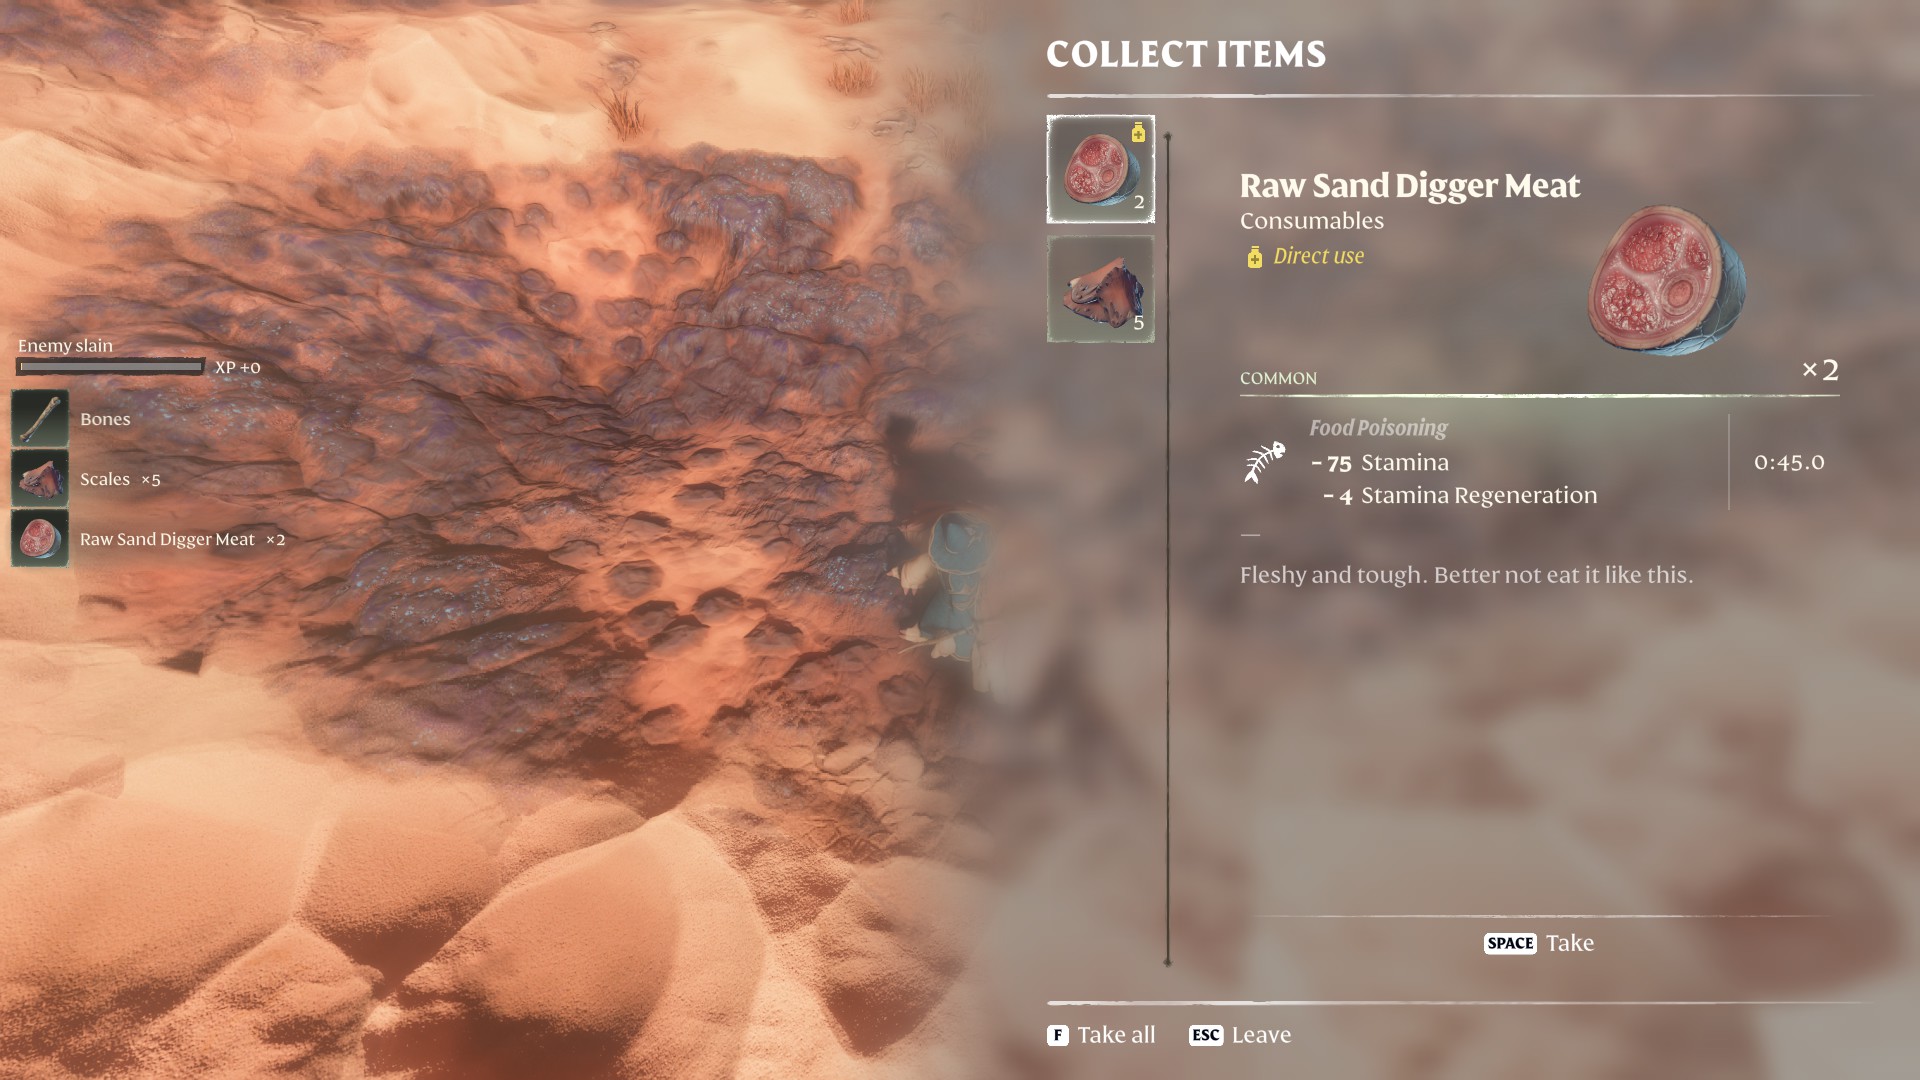 Finding Raw Sand Digger Meat in Enshrouded Game